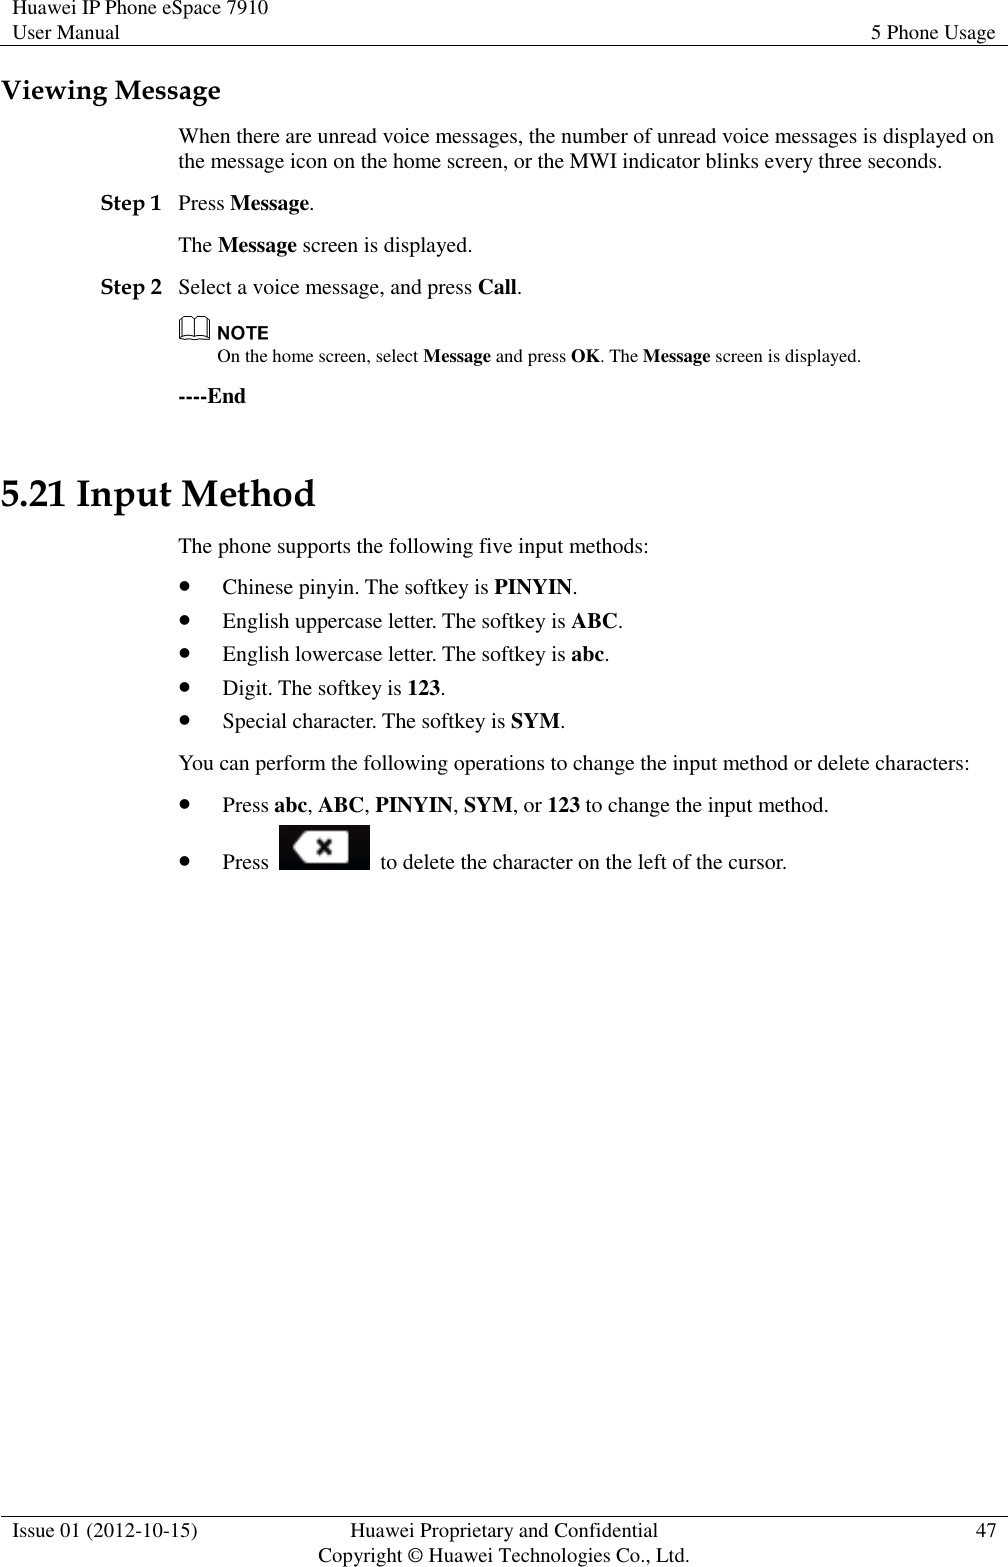 Huawei IP Phone eSpace 7910 User Manual 5 Phone Usage  Issue 01 (2012-10-15) Huawei Proprietary and Confidential                                     Copyright © Huawei Technologies Co., Ltd. 47  Viewing Message When there are unread voice messages, the number of unread voice messages is displayed on the message icon on the home screen, or the MWI indicator blinks every three seconds. Step 1 Press Message. The Message screen is displayed. Step 2 Select a voice message, and press Call.  On the home screen, select Message and press OK. The Message screen is displayed. ----End 5.21 Input Method The phone supports the following five input methods:  Chinese pinyin. The softkey is PINYIN.  English uppercase letter. The softkey is ABC.  English lowercase letter. The softkey is abc.  Digit. The softkey is 123.  Special character. The softkey is SYM. You can perform the following operations to change the input method or delete characters:  Press abc, ABC, PINYIN, SYM, or 123 to change the input method.  Press    to delete the character on the left of the cursor. 